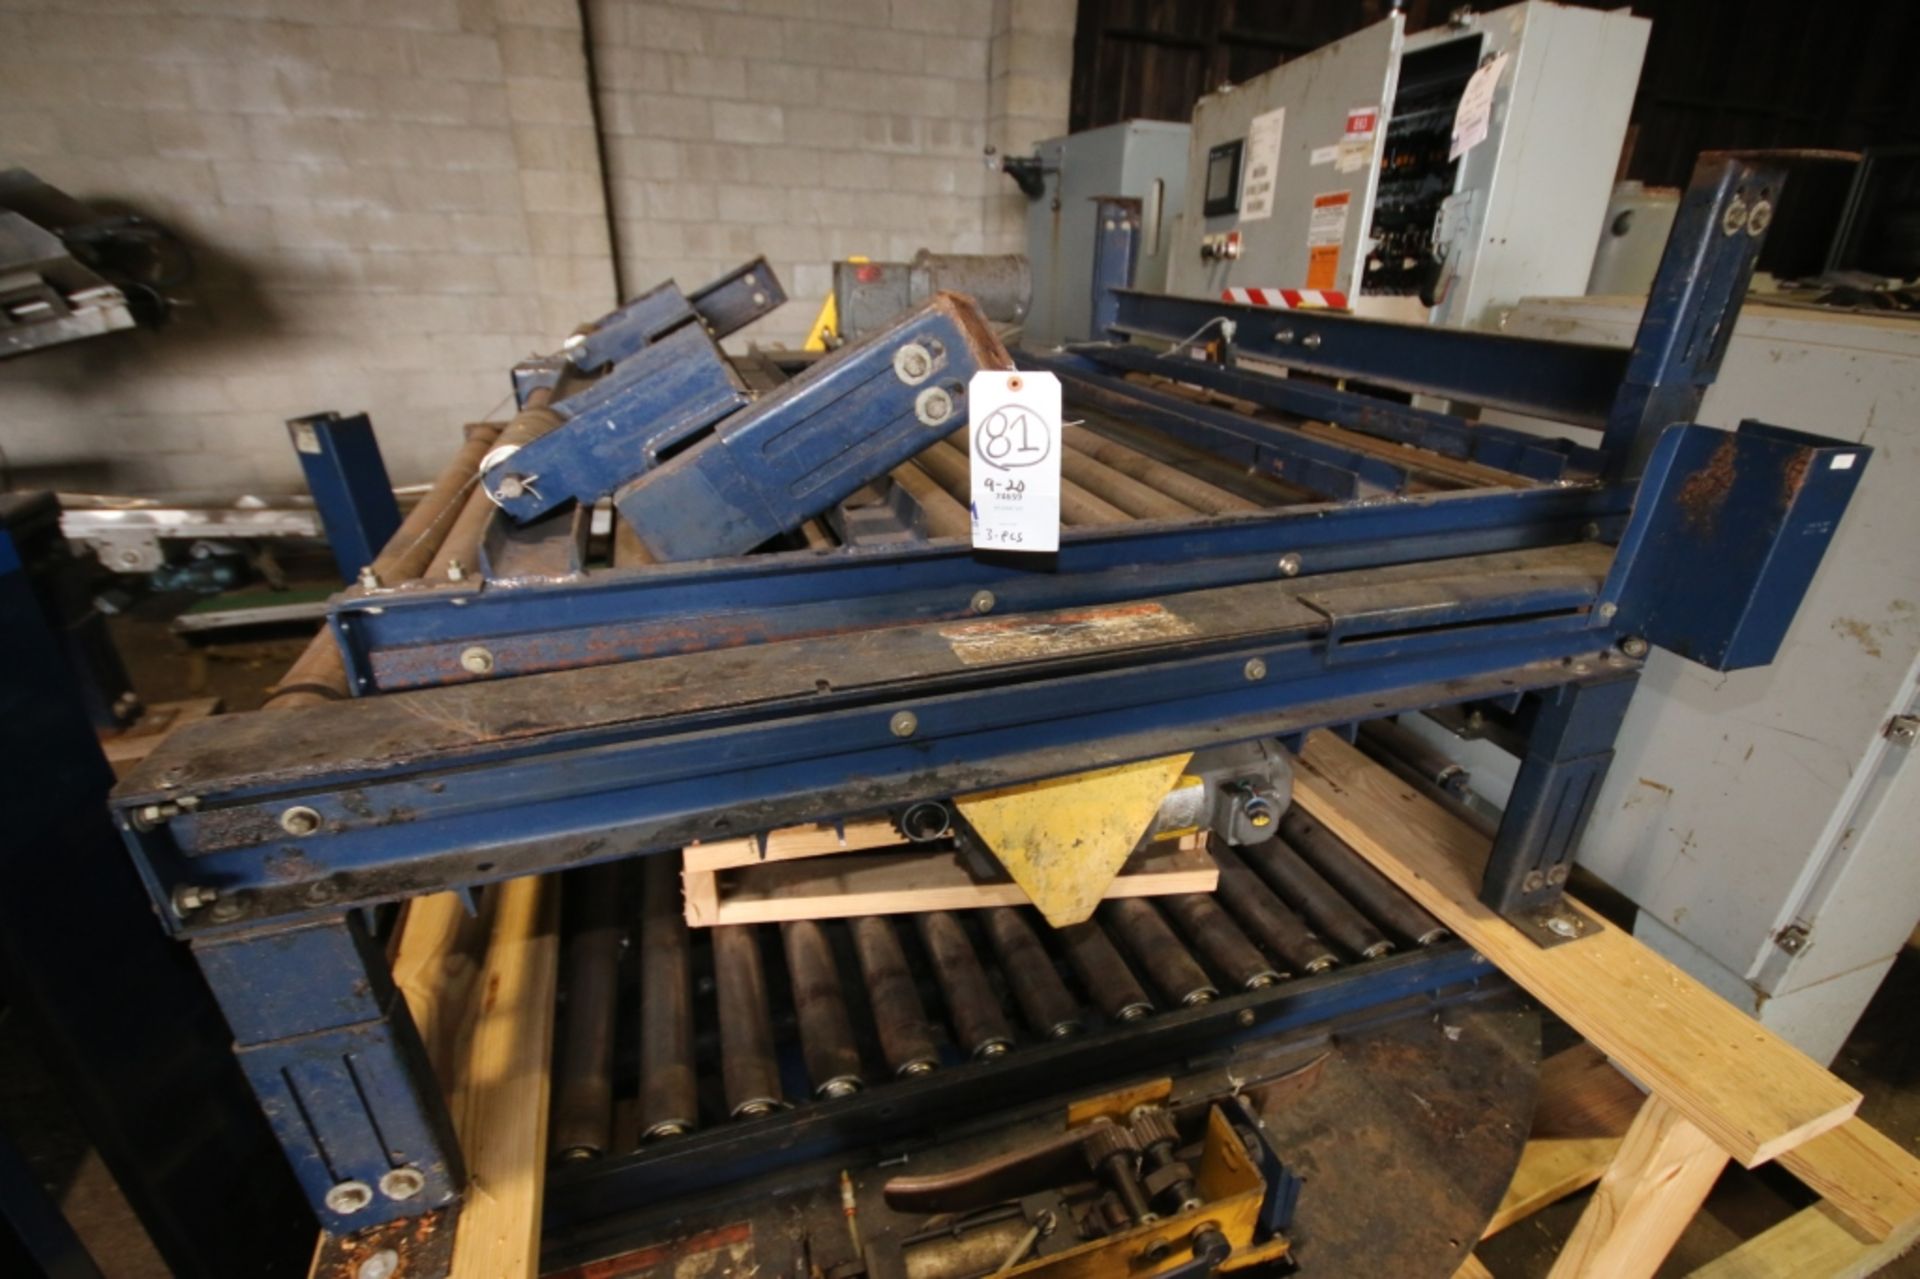 3 - Pcs Conveyor Beds, Includes 78" Lx 52" W Conveyor Rotating Bed with Drive, (2) 5 ft L x 52" W - Image 3 of 4